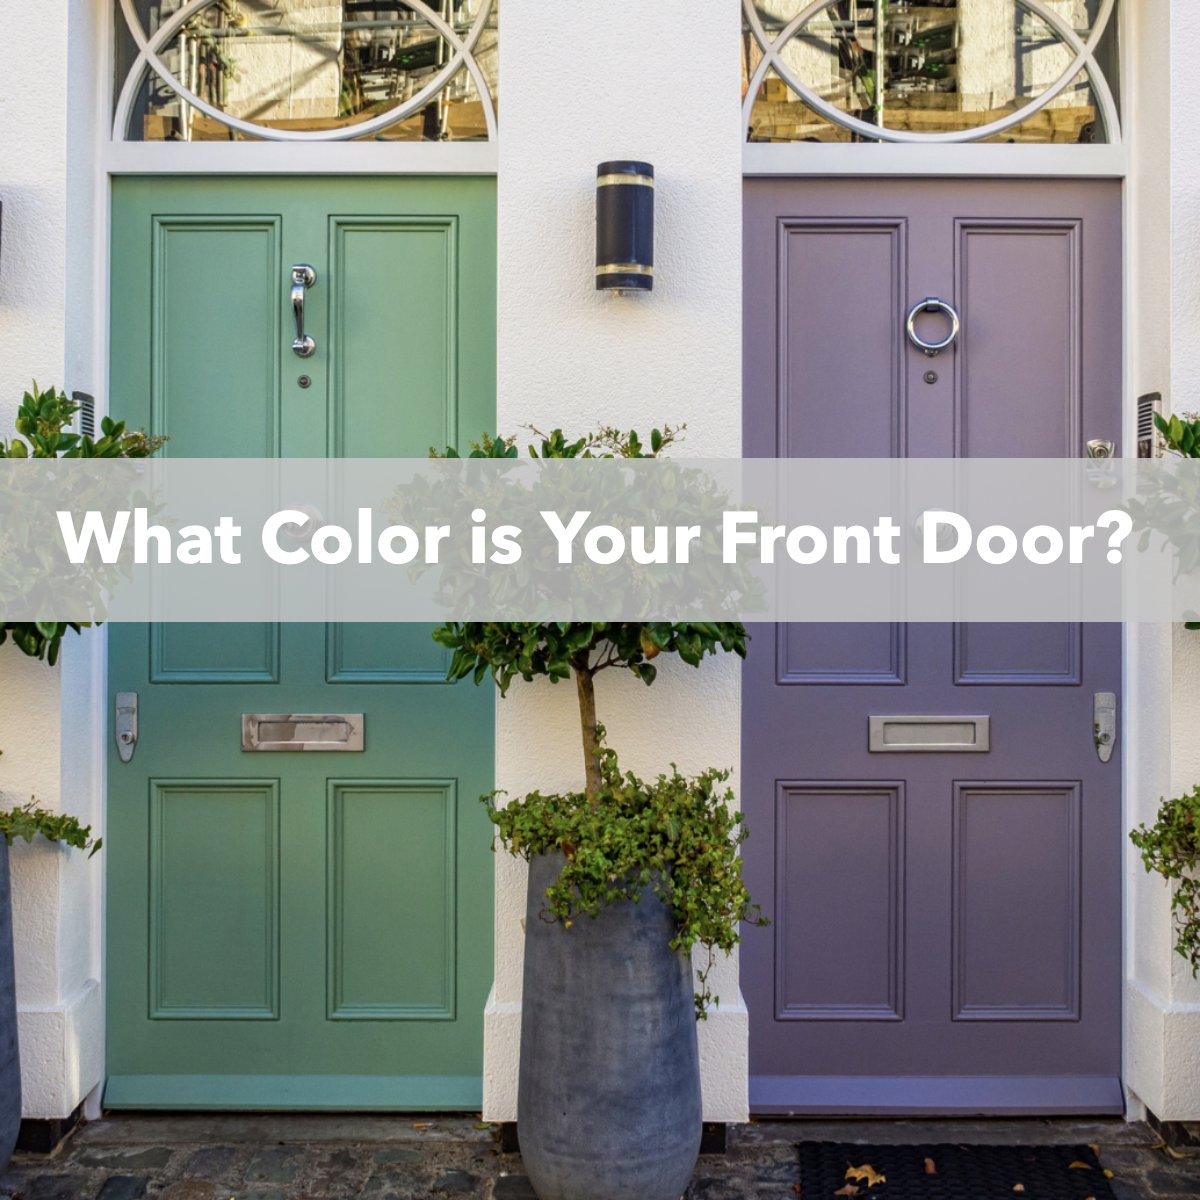 Did you select the color or did you just settle? 🤔

Tell us in the comments! 👇 

#questions #frontdoor #doorcolor #exterior #realestate
 #MVPRealty #Jayneyardenrealtor #Gulfcoastrealestate #Tampabayrealestate #floridarealestateforsale #florida #movetoflorida